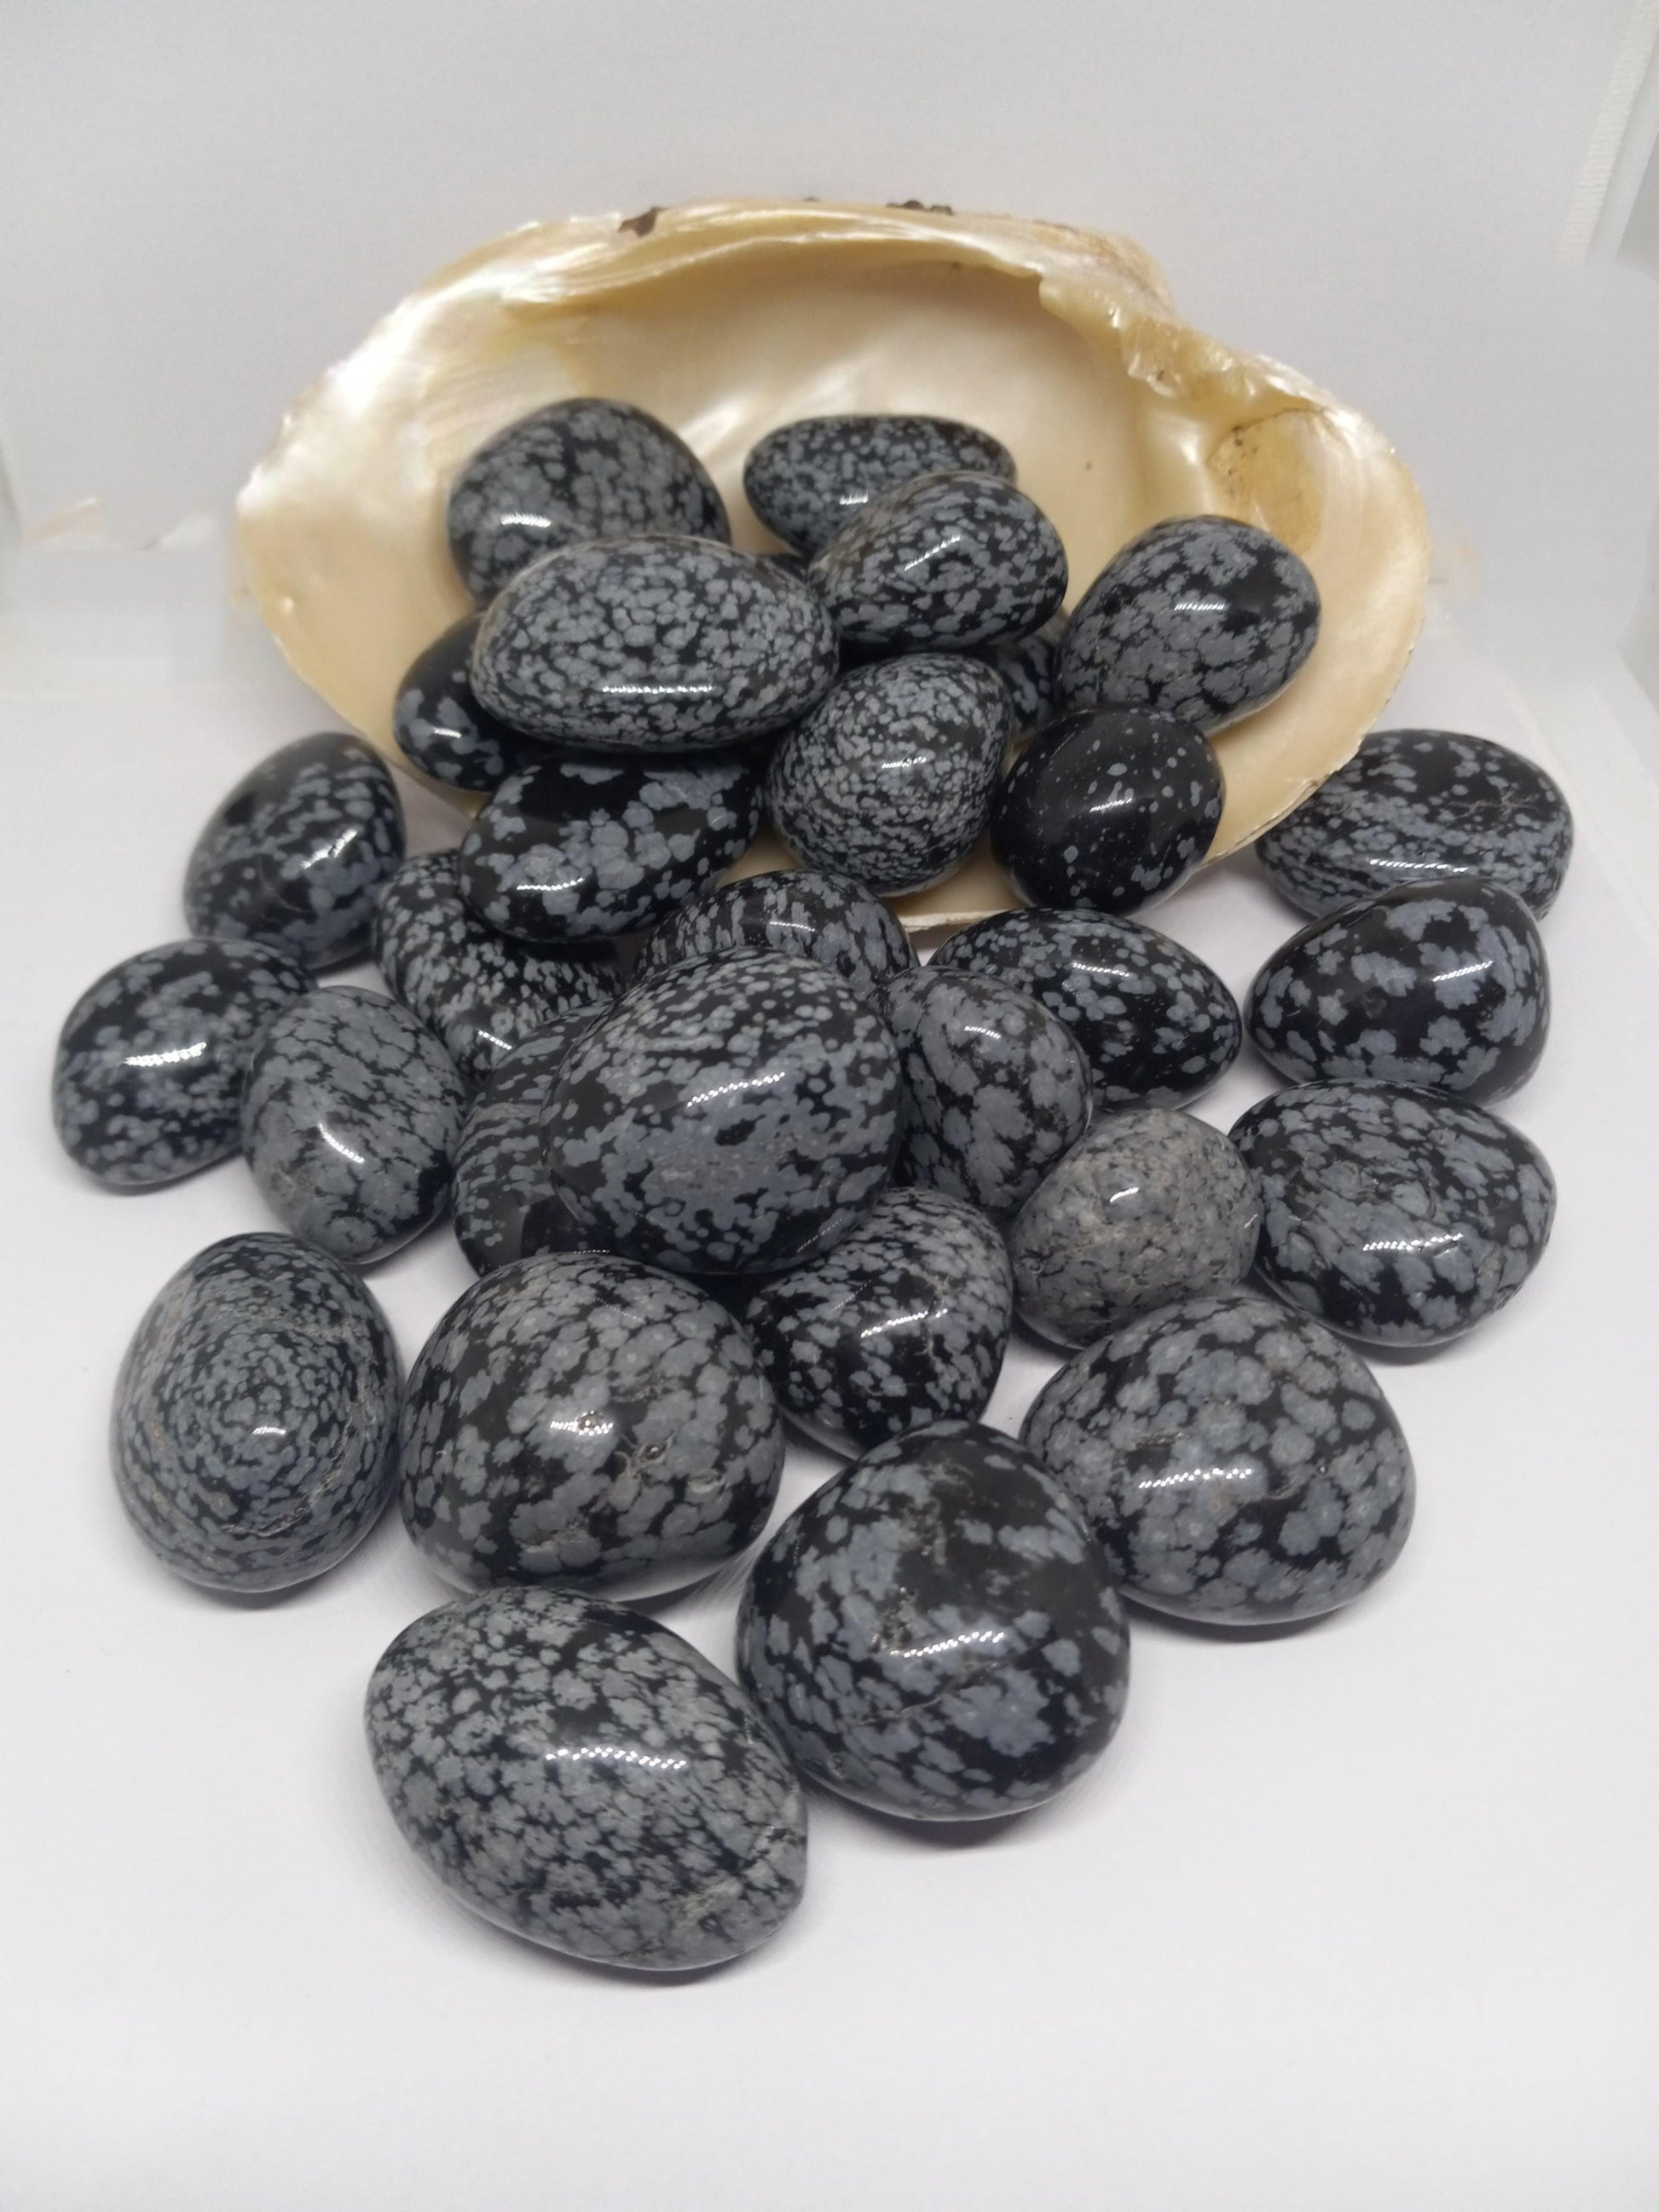 Top Quality Snowflake Obsidian Natural Tumbled Reiki Crystal $2.25 - Guiding Lights Boutique